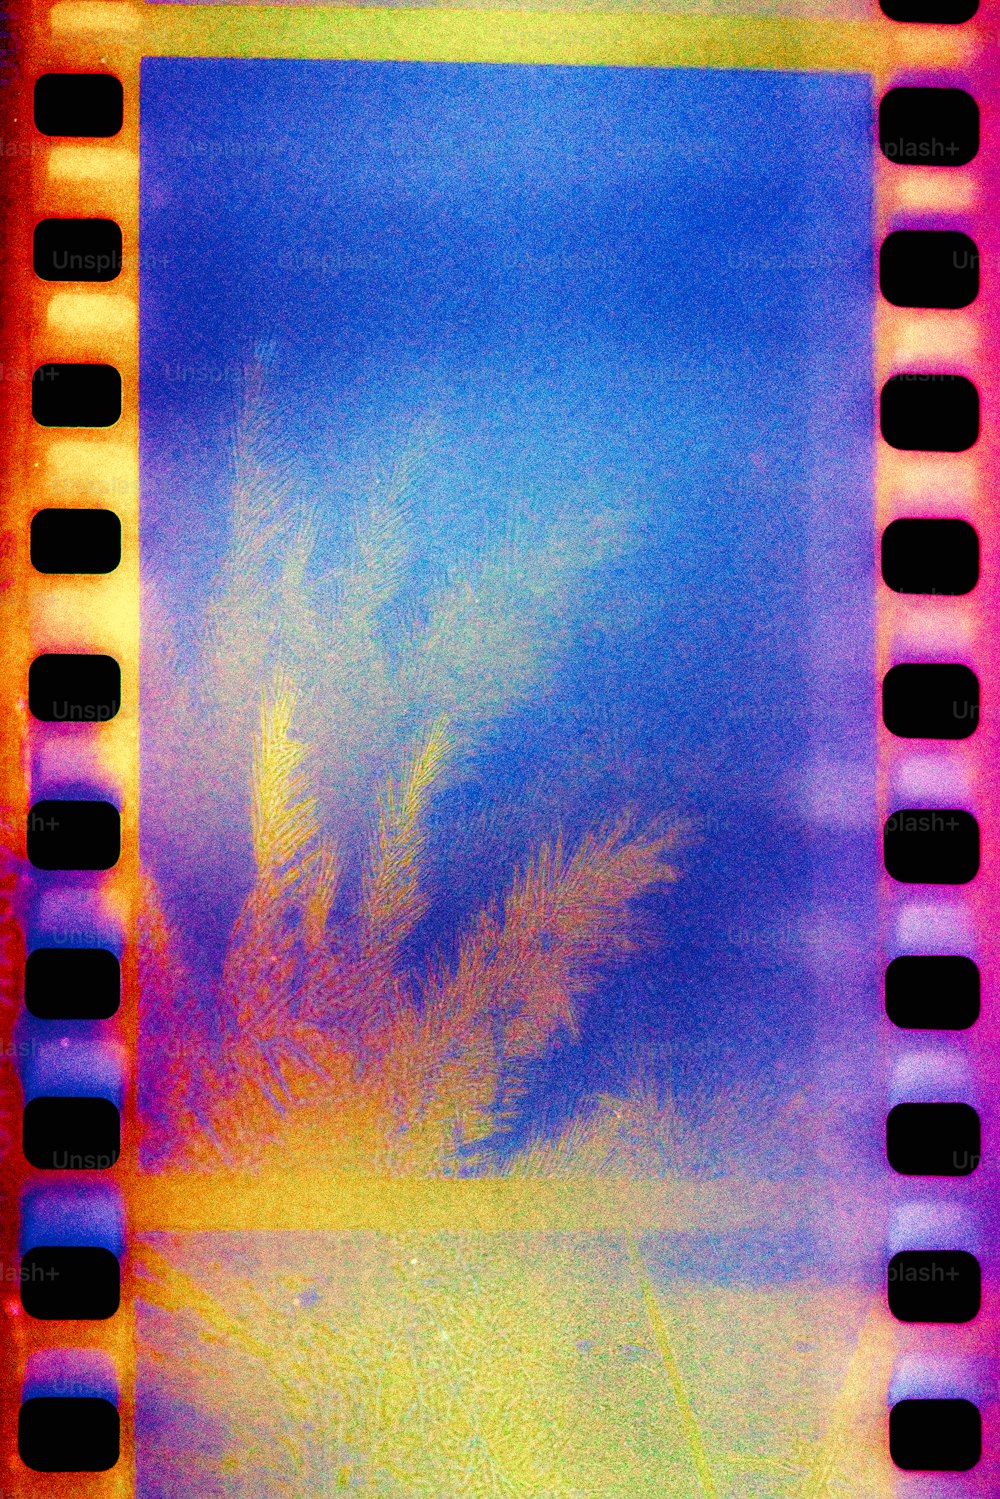 a film strip with a picture of a palm tree